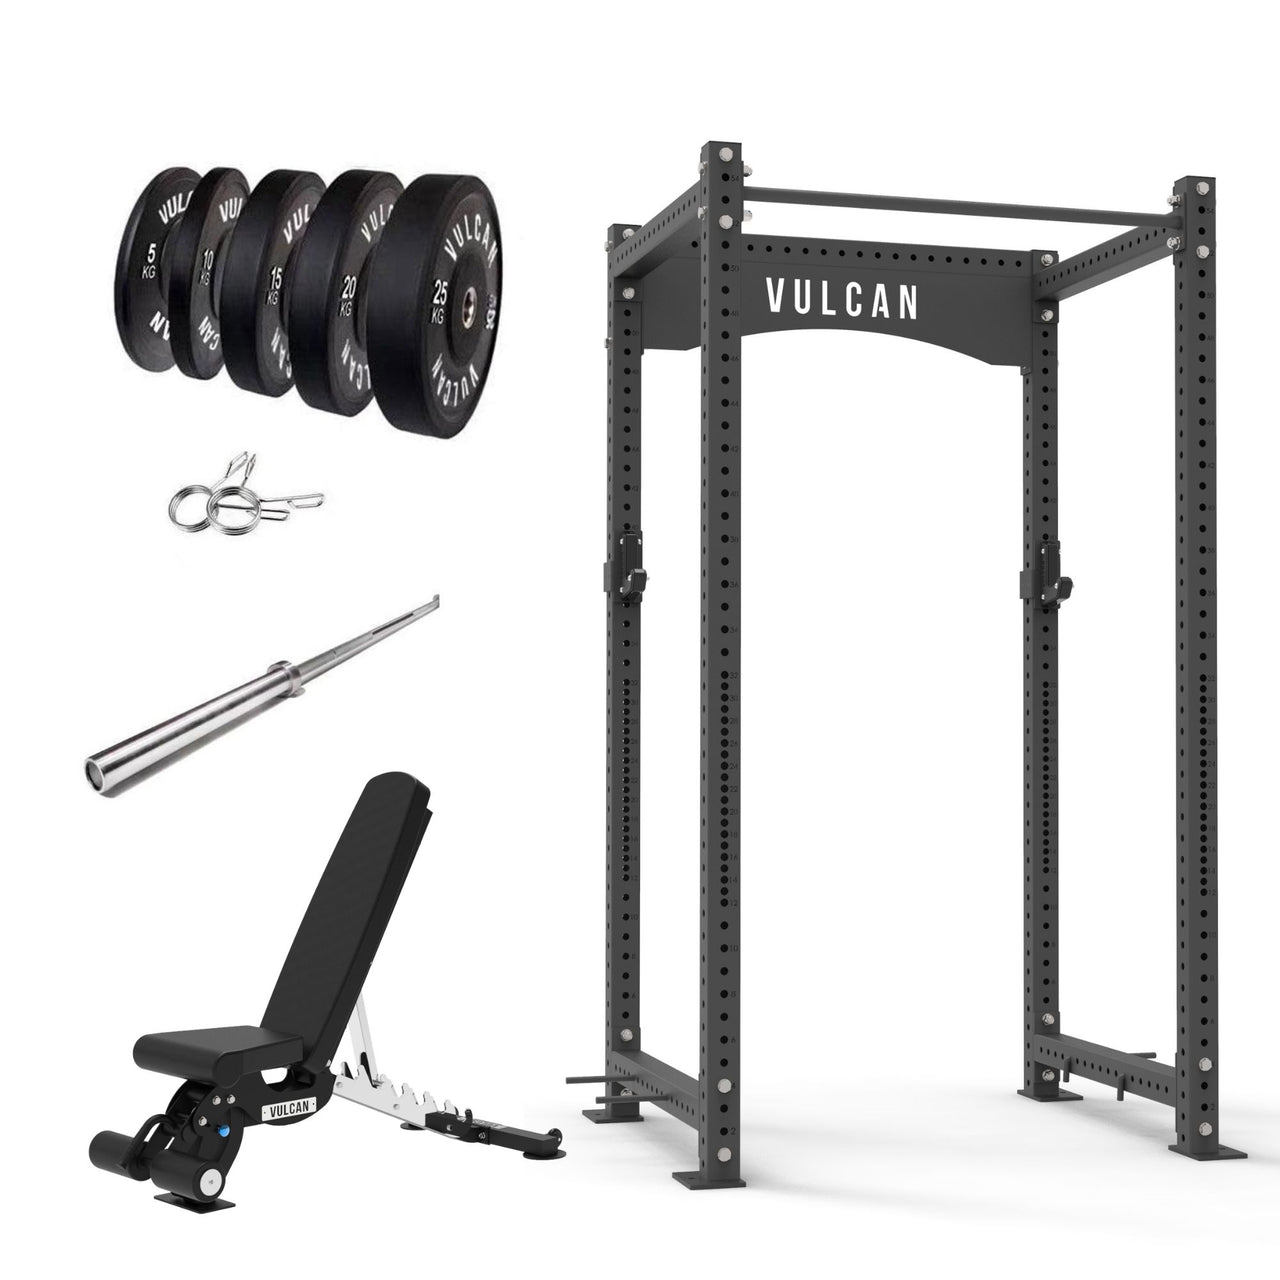 VULCAN Atlas Power Rack, Olympic Barbell, 150kg Black Bumper Weight Plates & Commercial FID Bench | IN STOCK